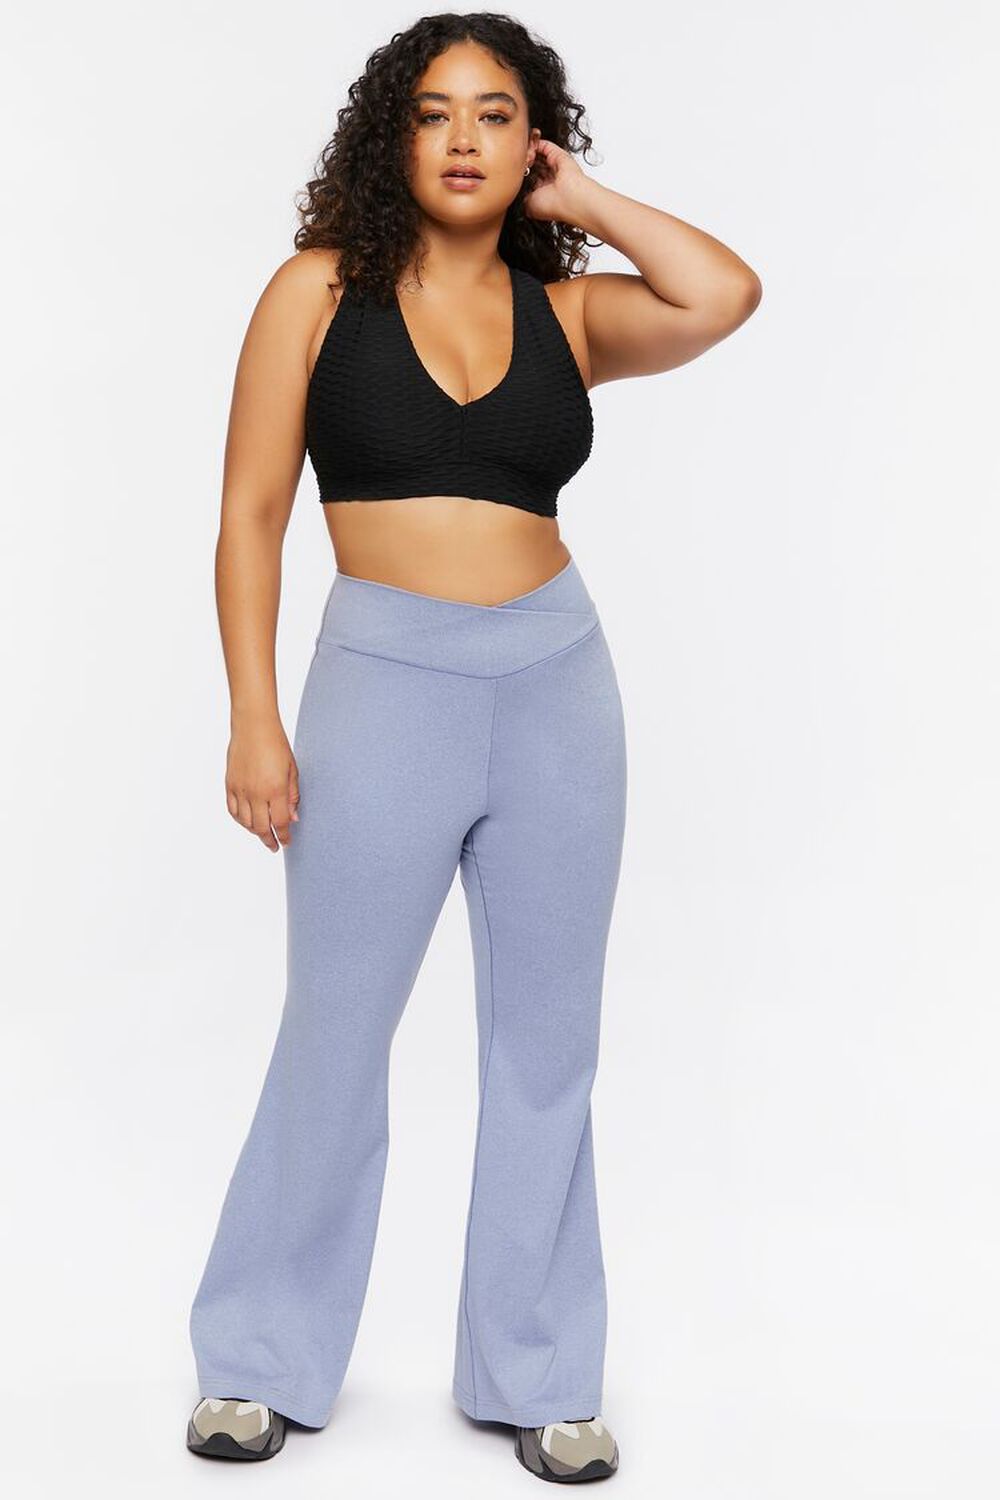 BLUE MIRAGE Plus Size Crossover Flare Pants, image 1